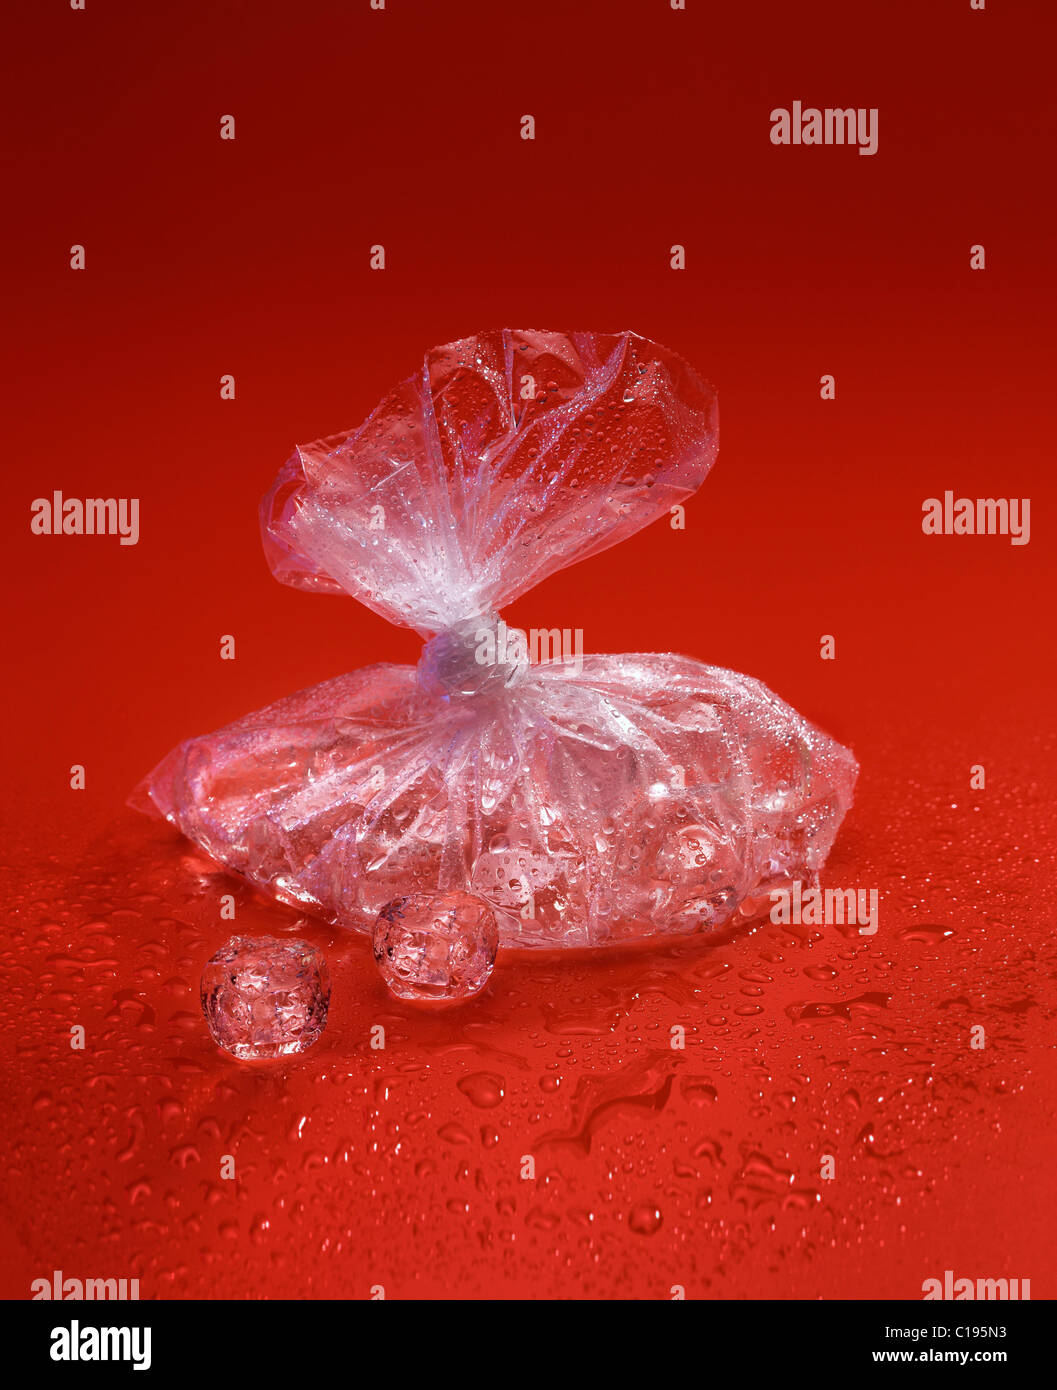 Translucent plastic bag with ice cubes on a red surface Stock Photo